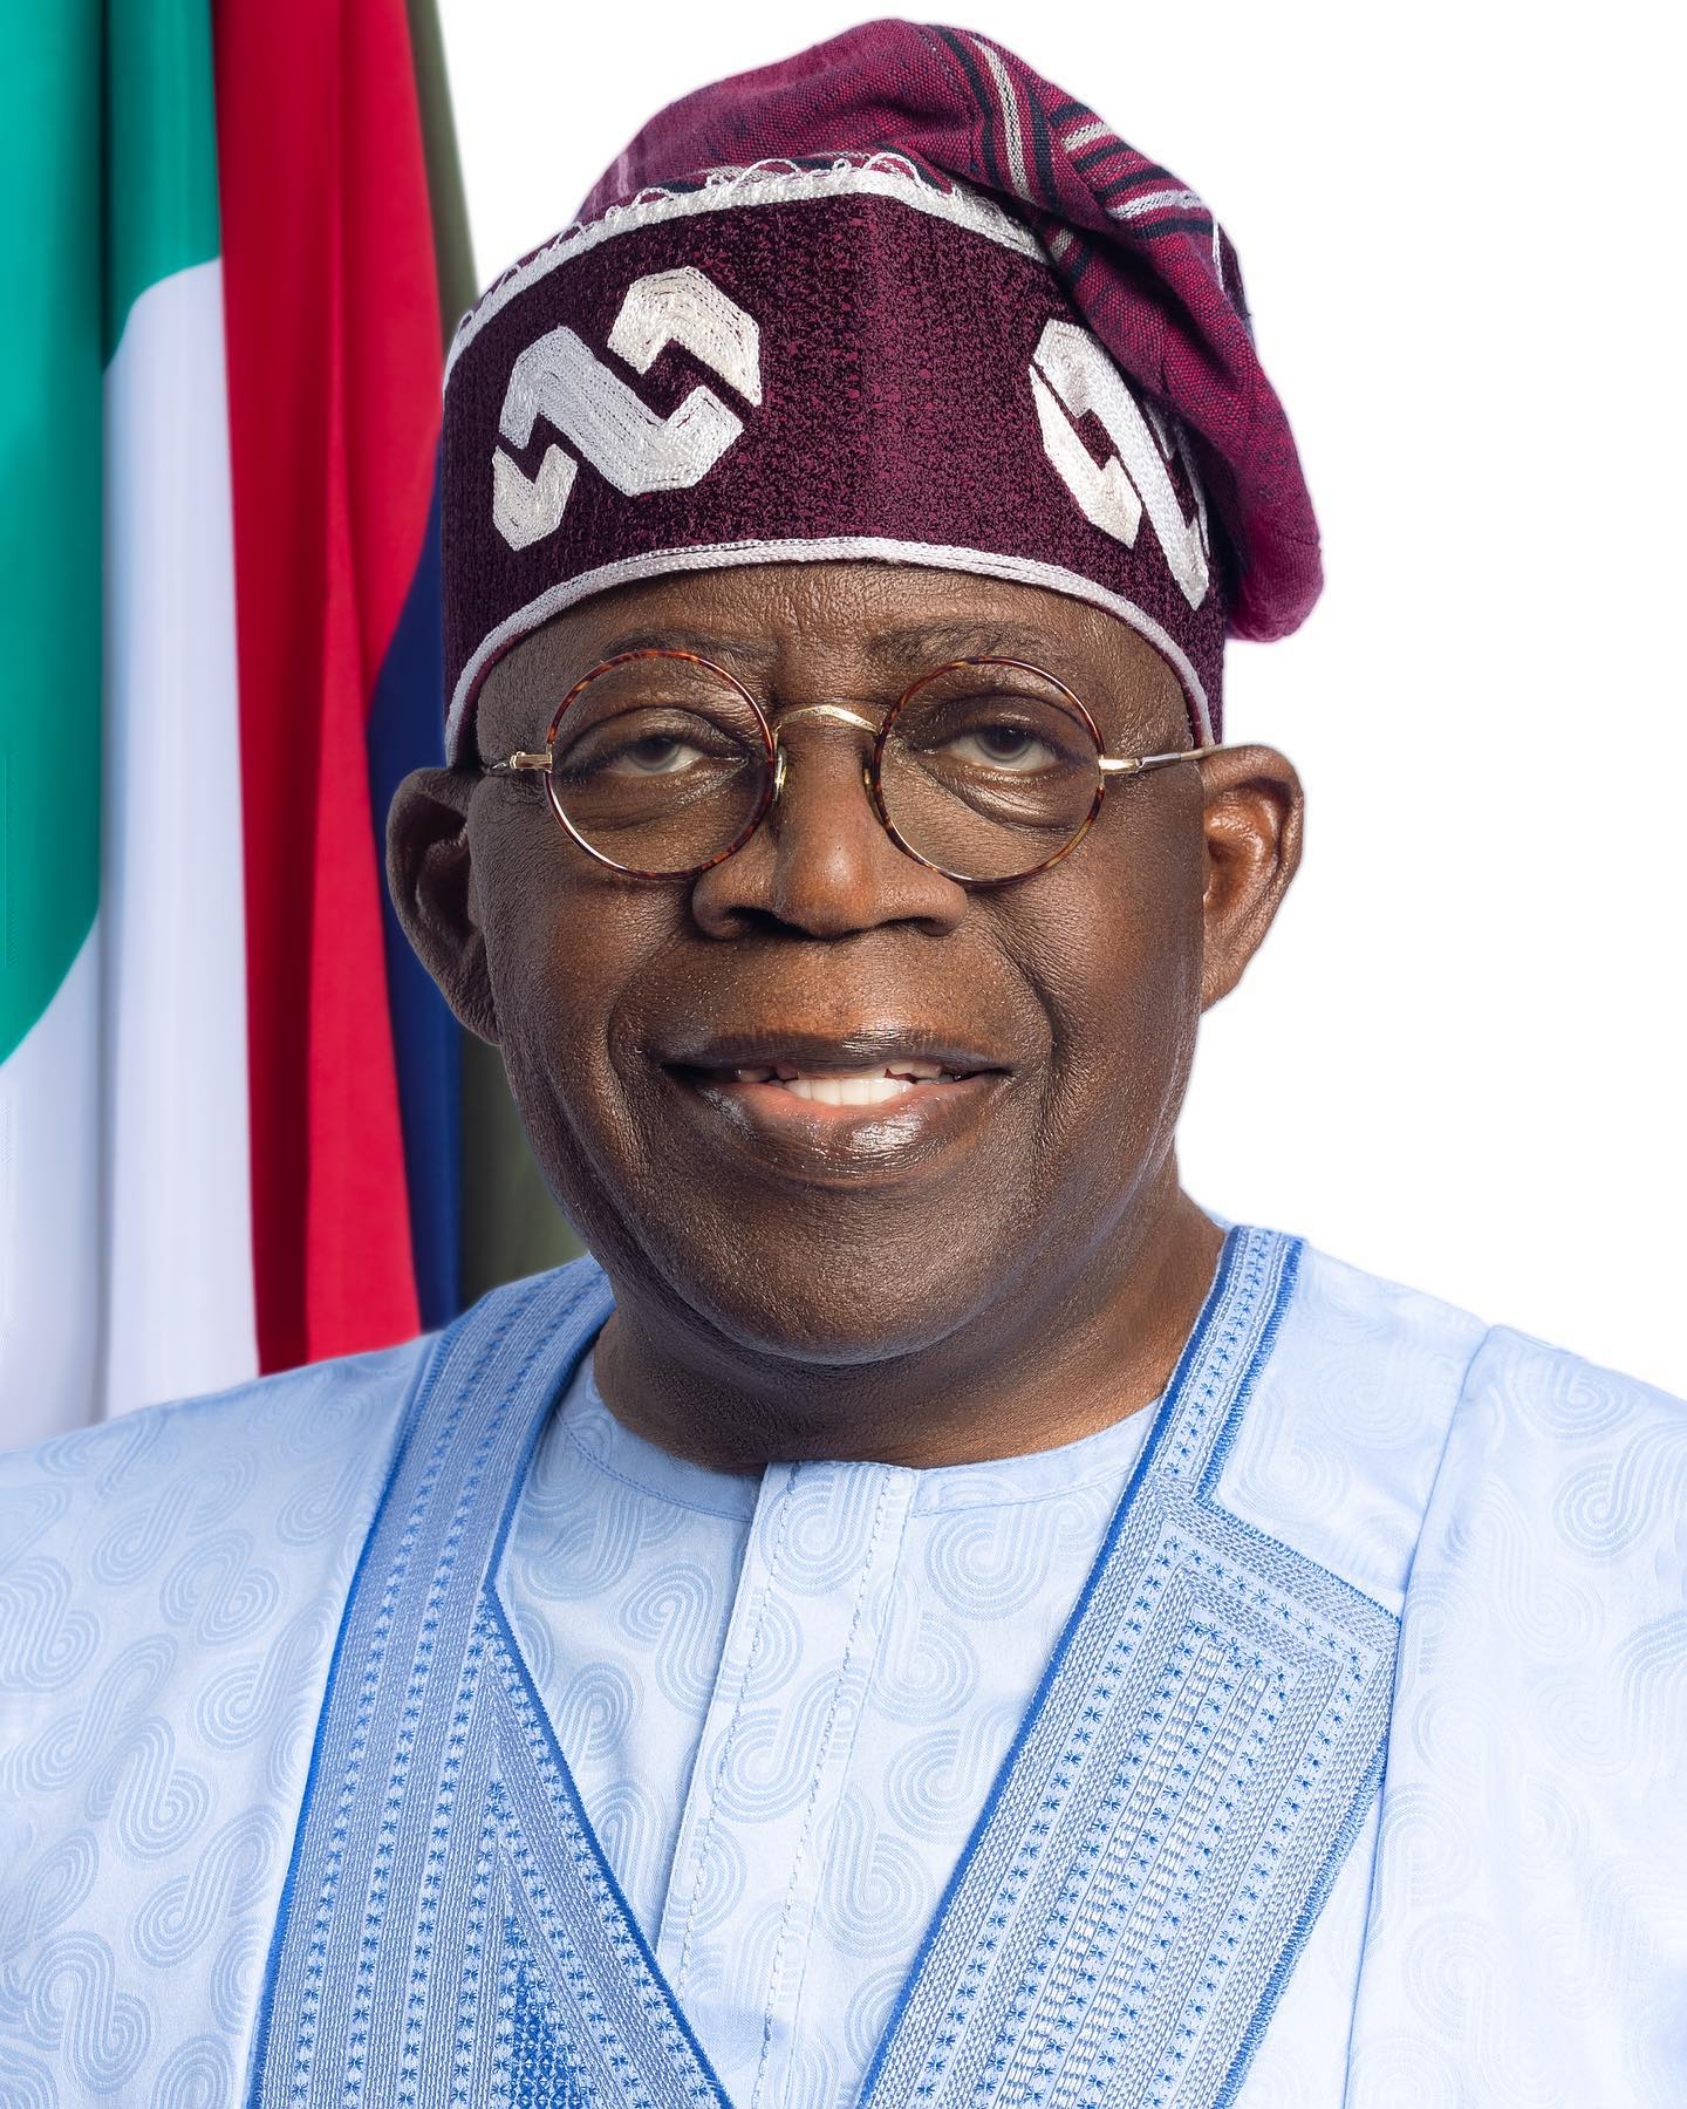 Threads welcomes Tinubu as one of its 30 million+ users